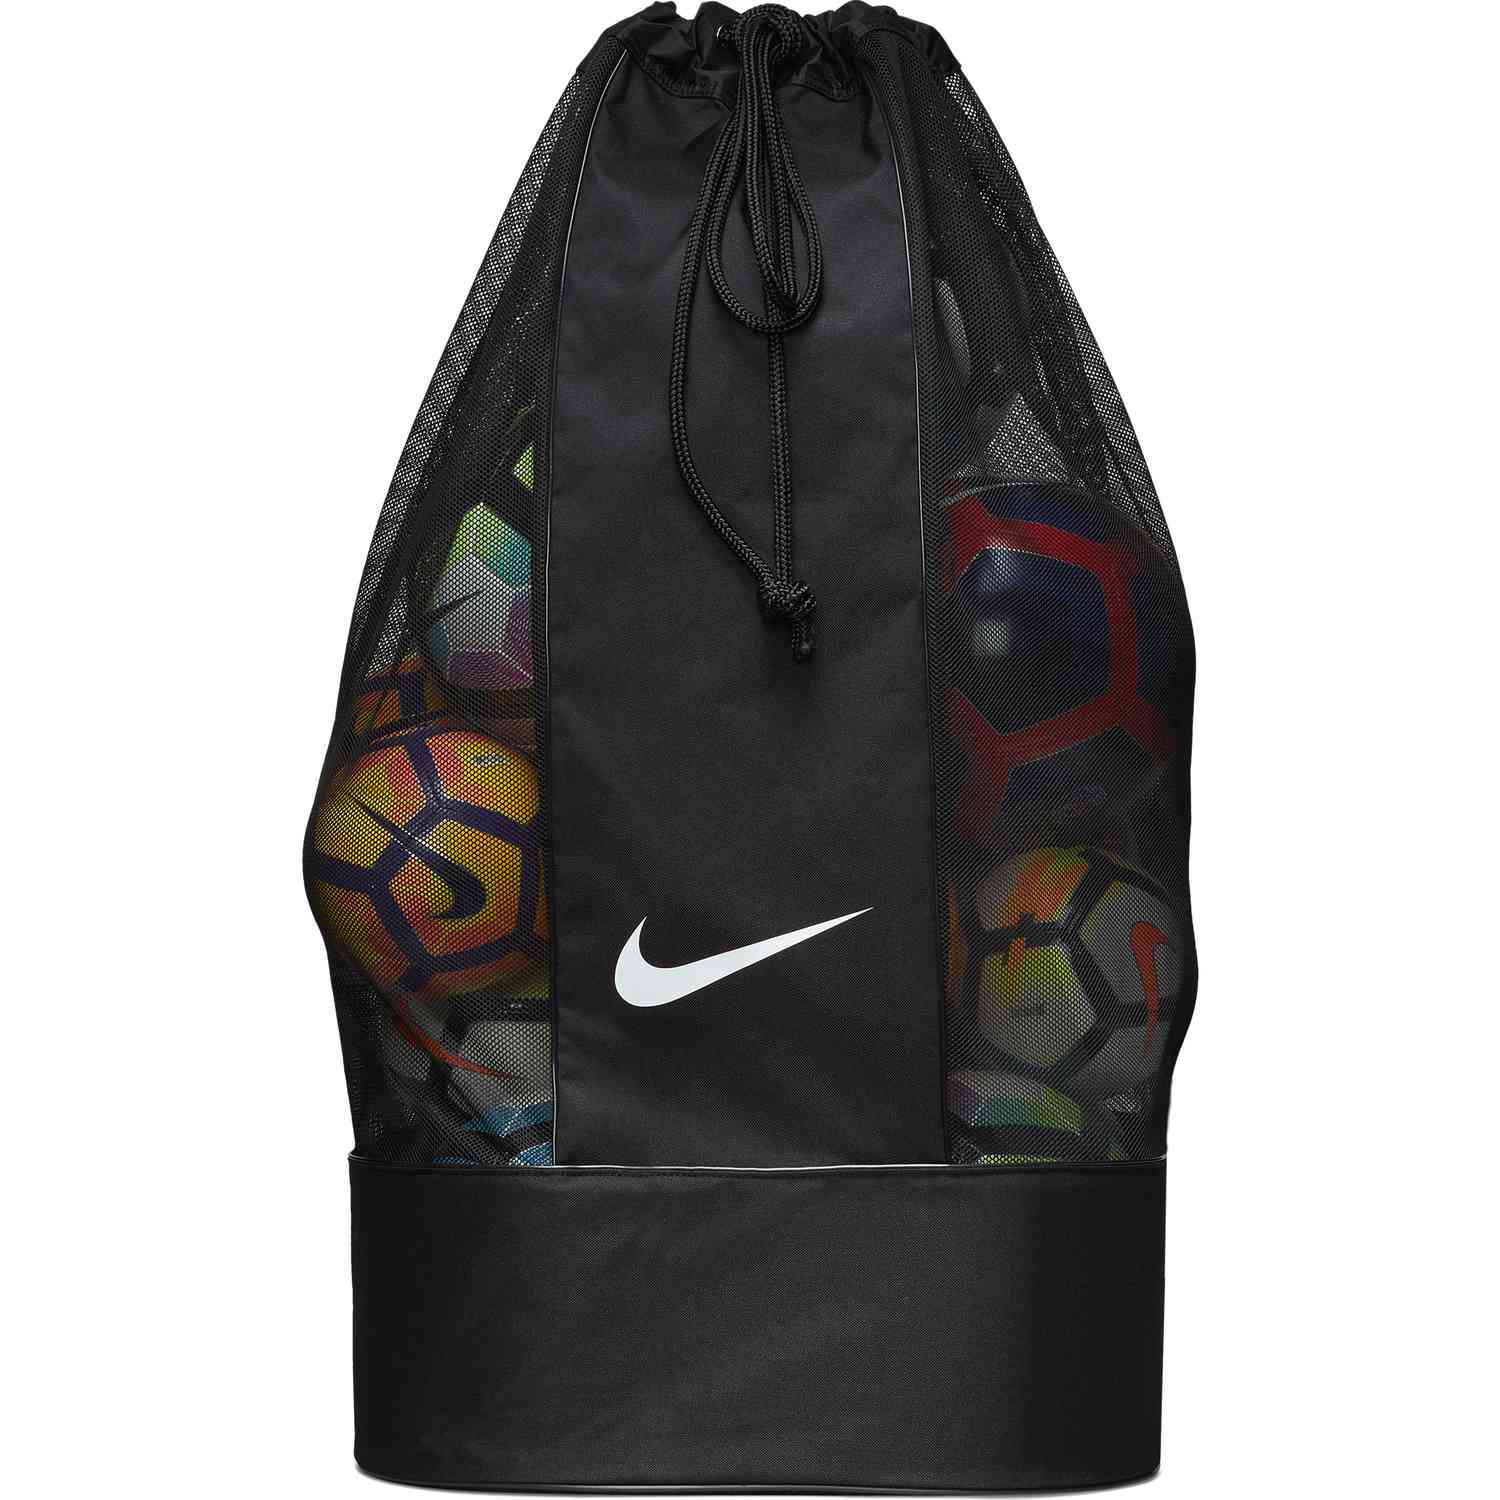 Buy Select MultiPurpose Soccer Ball Bag Online at Low Prices in India   Amazonin